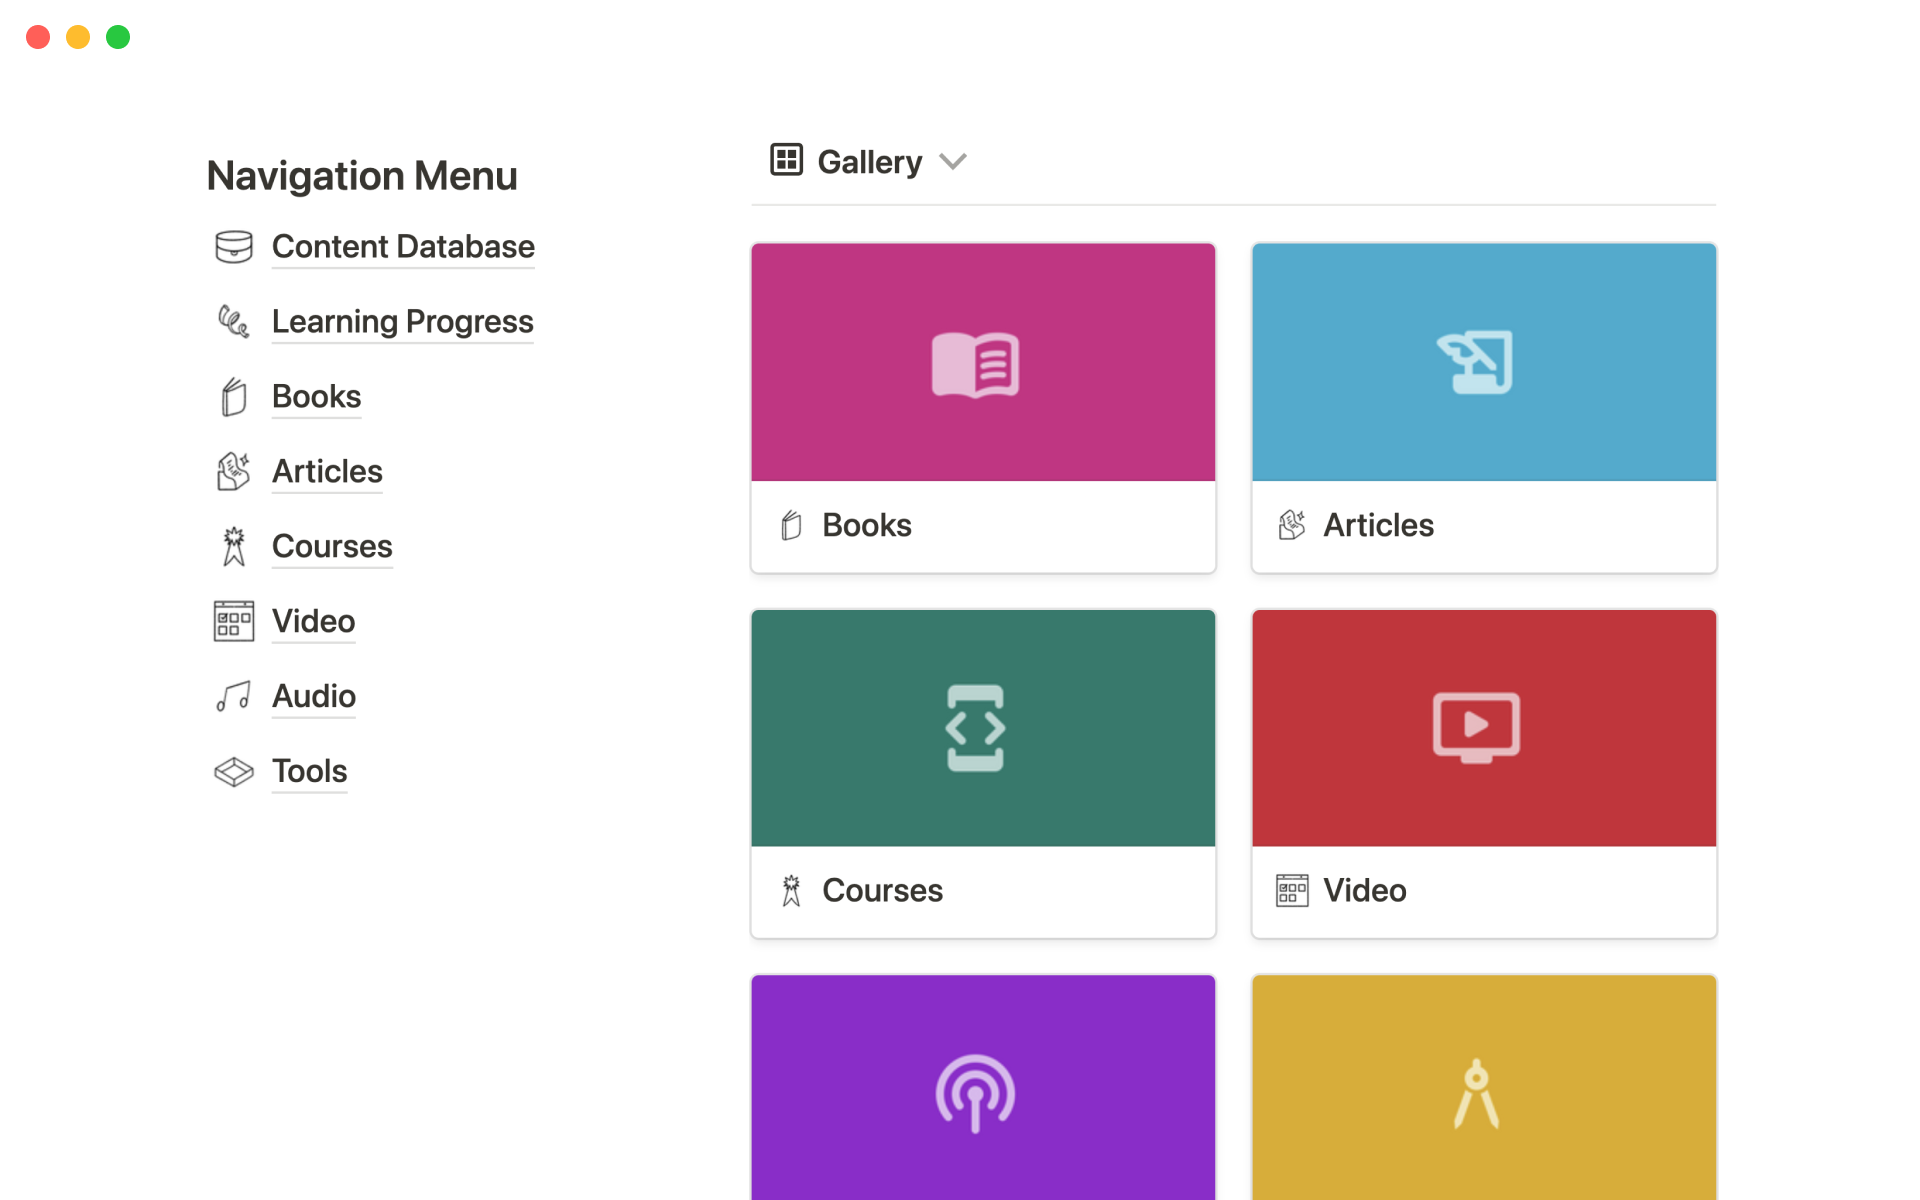 Save and track all your learning materials in one place.